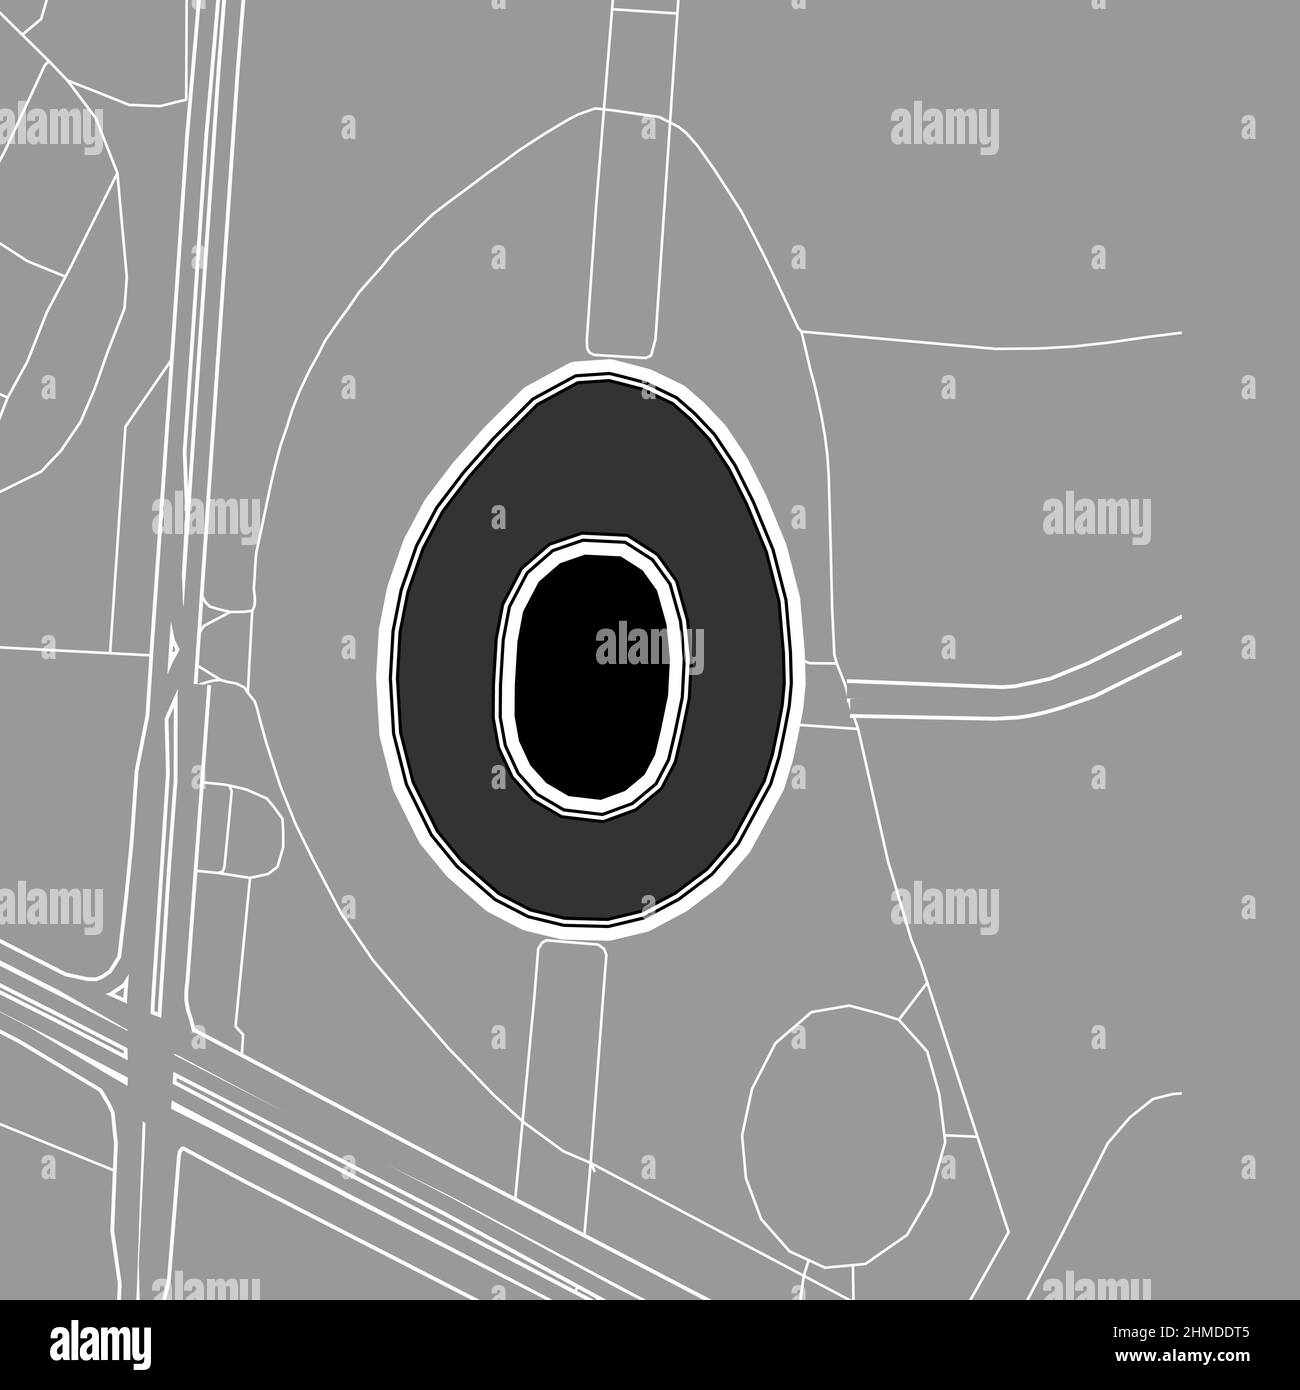 Tianjin, Baseball MLB Stadium, outline vector map. The baseball statium map was drawn with white areas and lines for main roads, side roads. Stock Vector